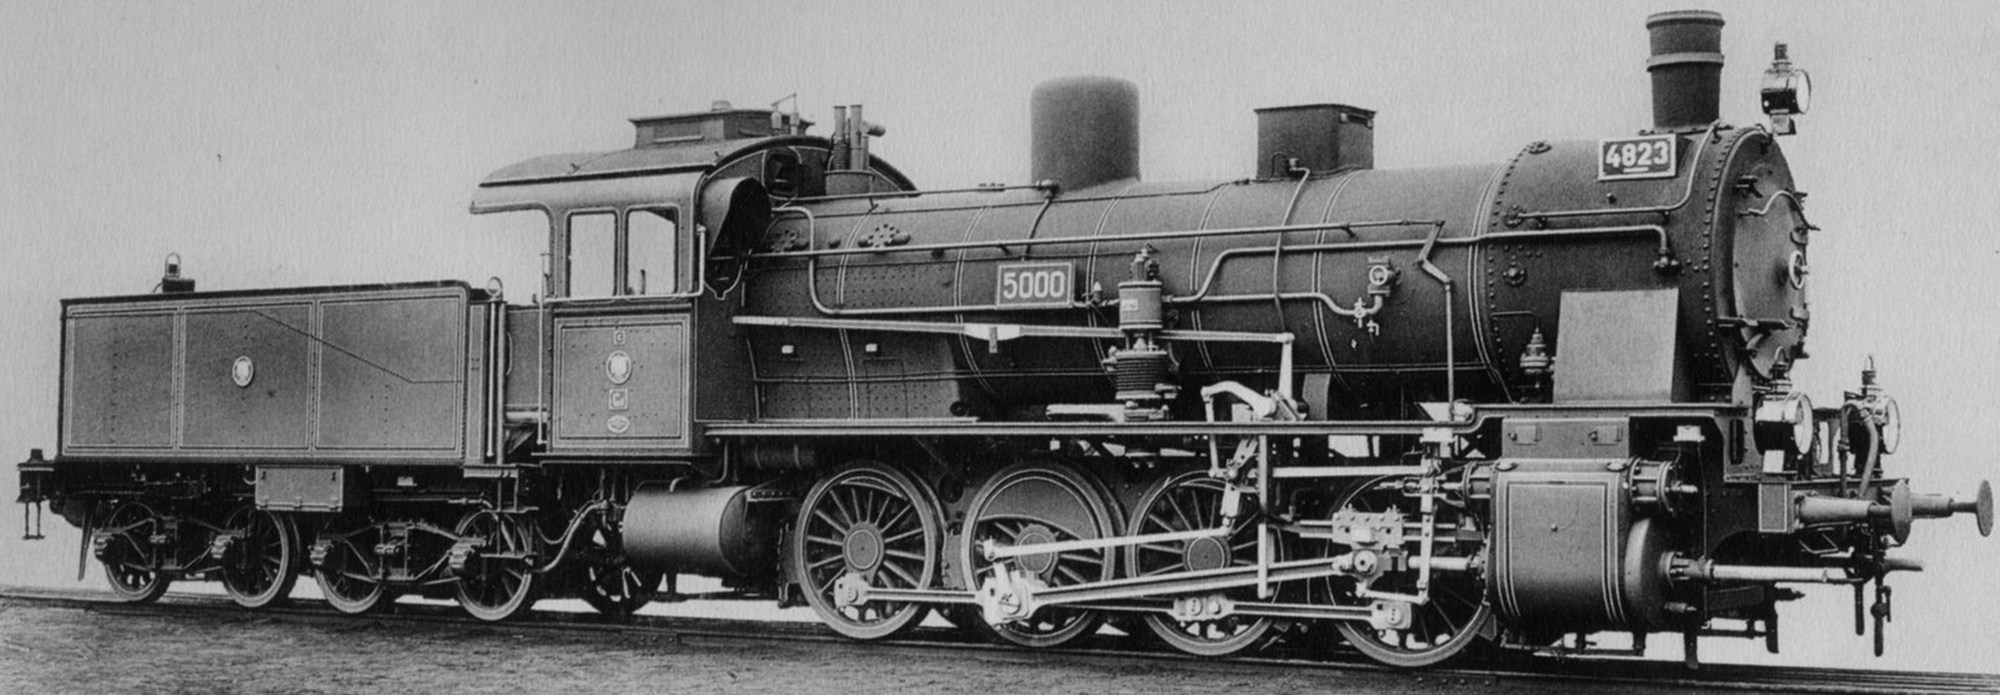 No. 4823, being the 5,000th locomotive of Orenstein & Koppel, on a 1913 builder's photo